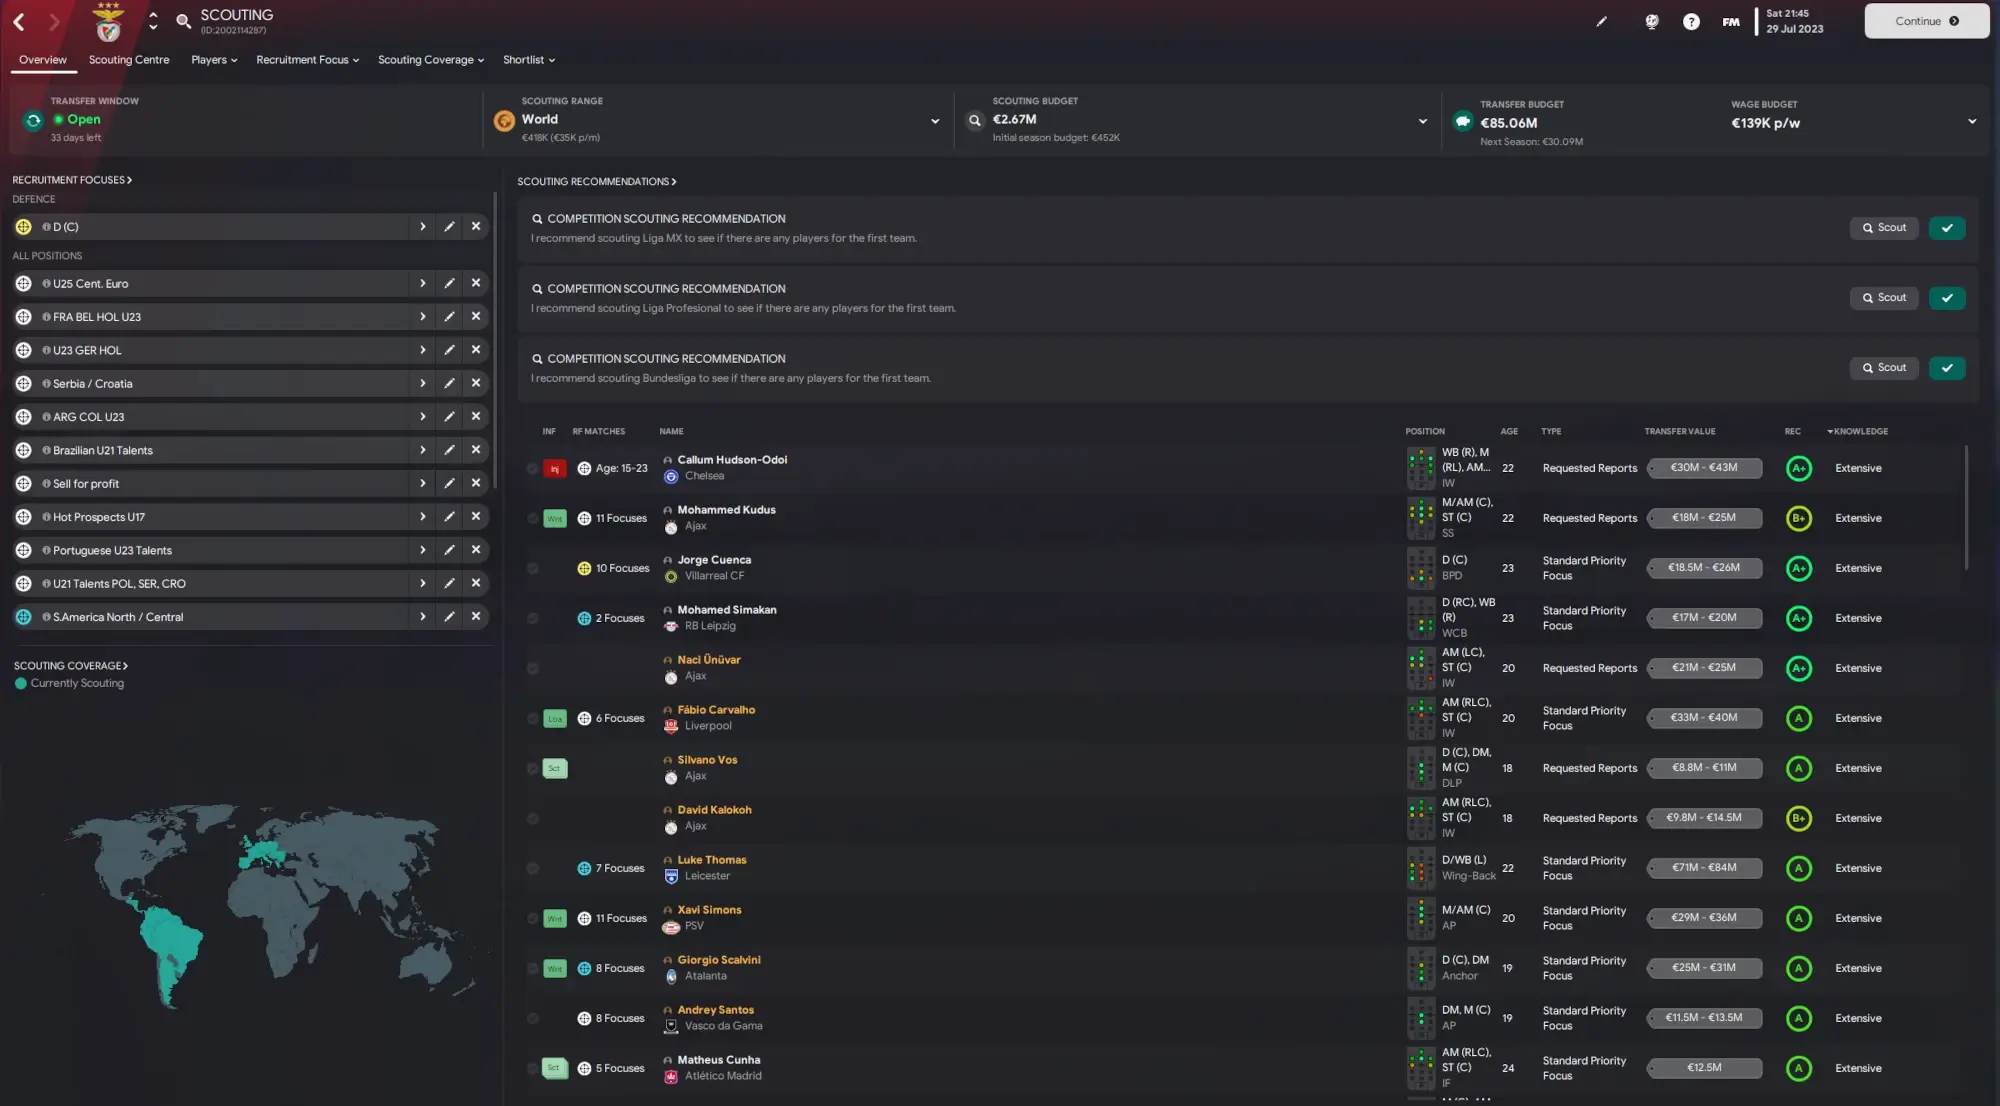 Football Manager ultimate scouting guide overview